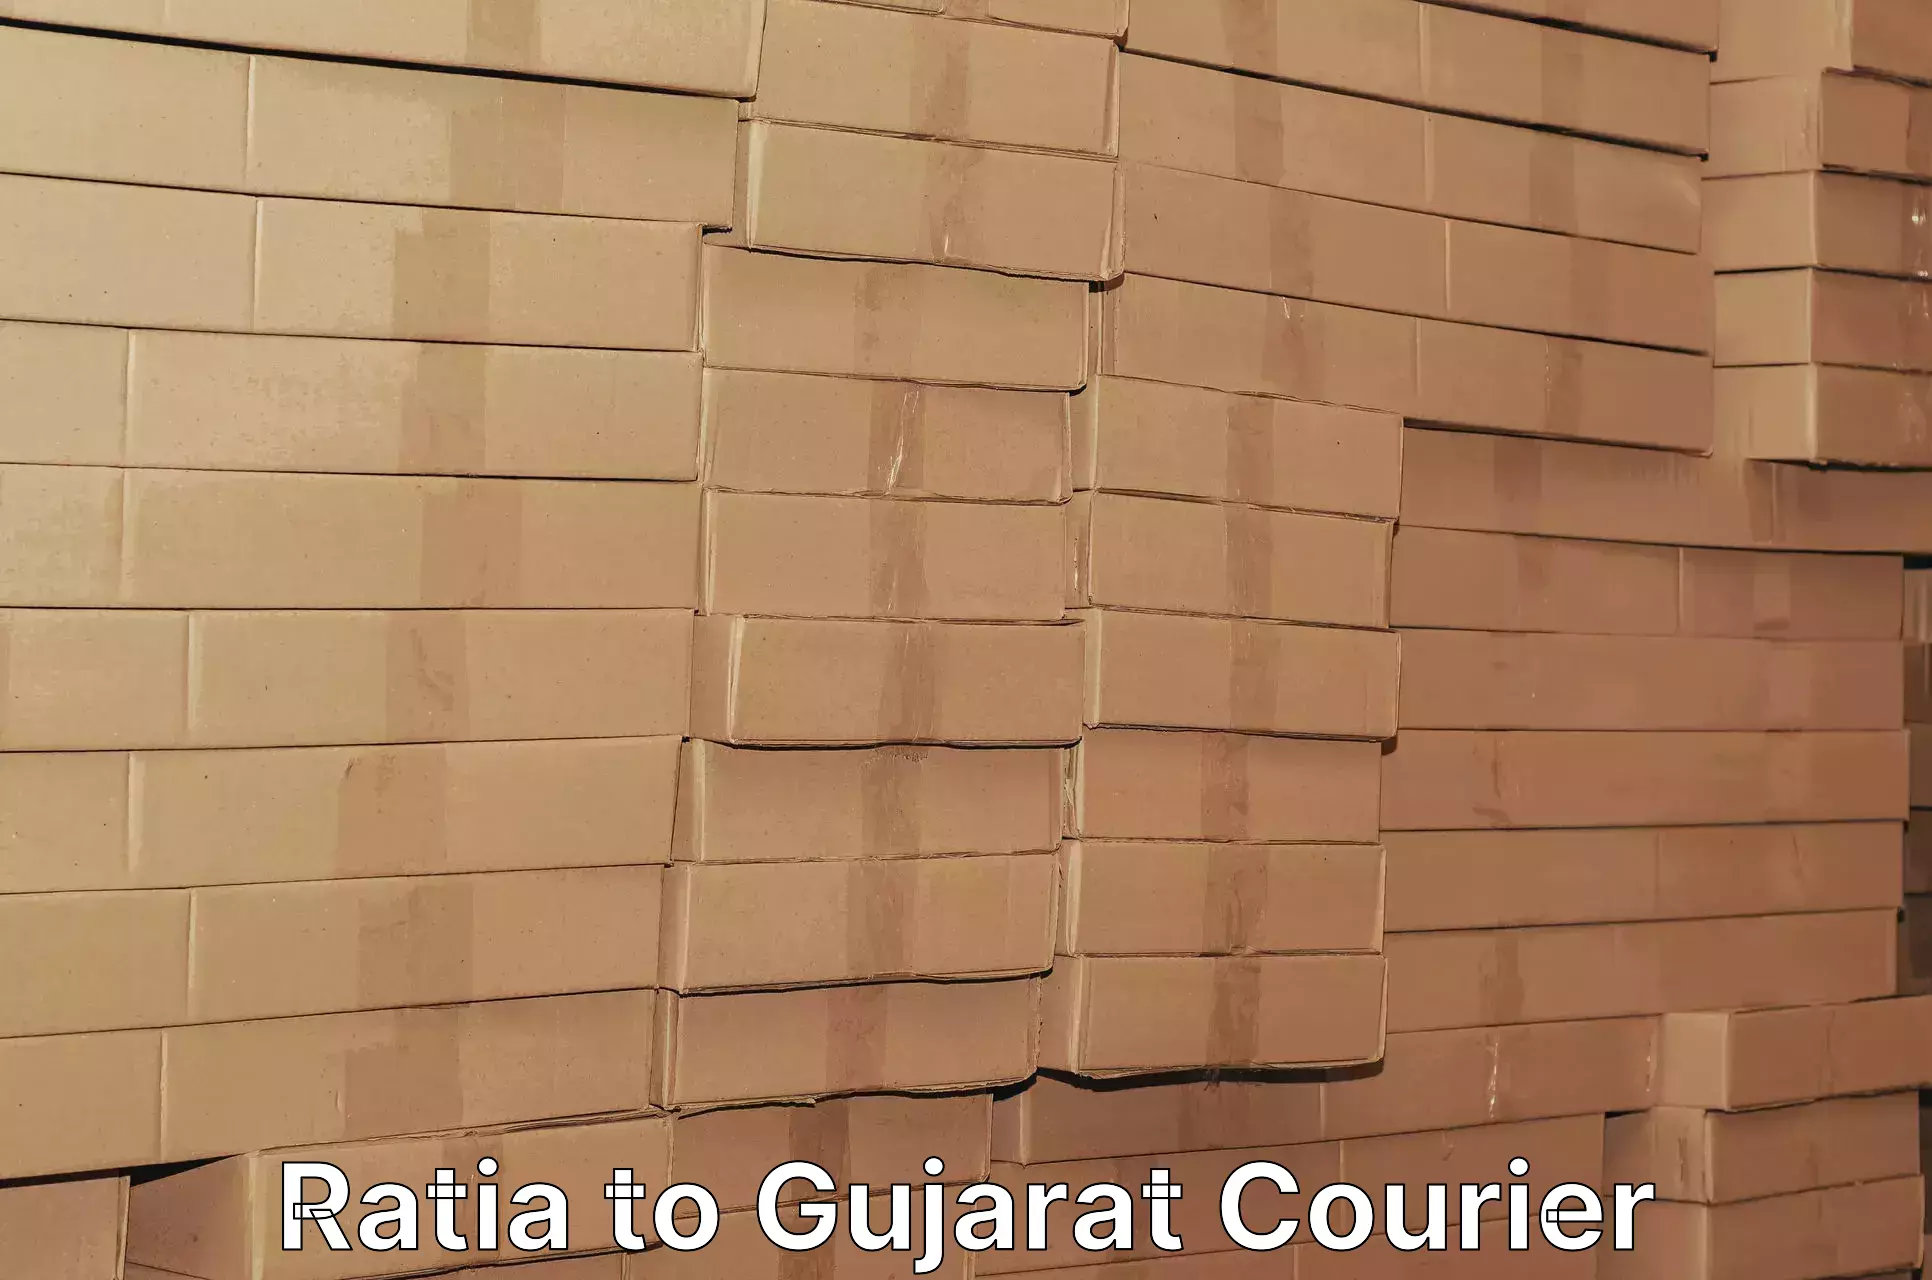 Advanced shipping technology in Ratia to Gujarat